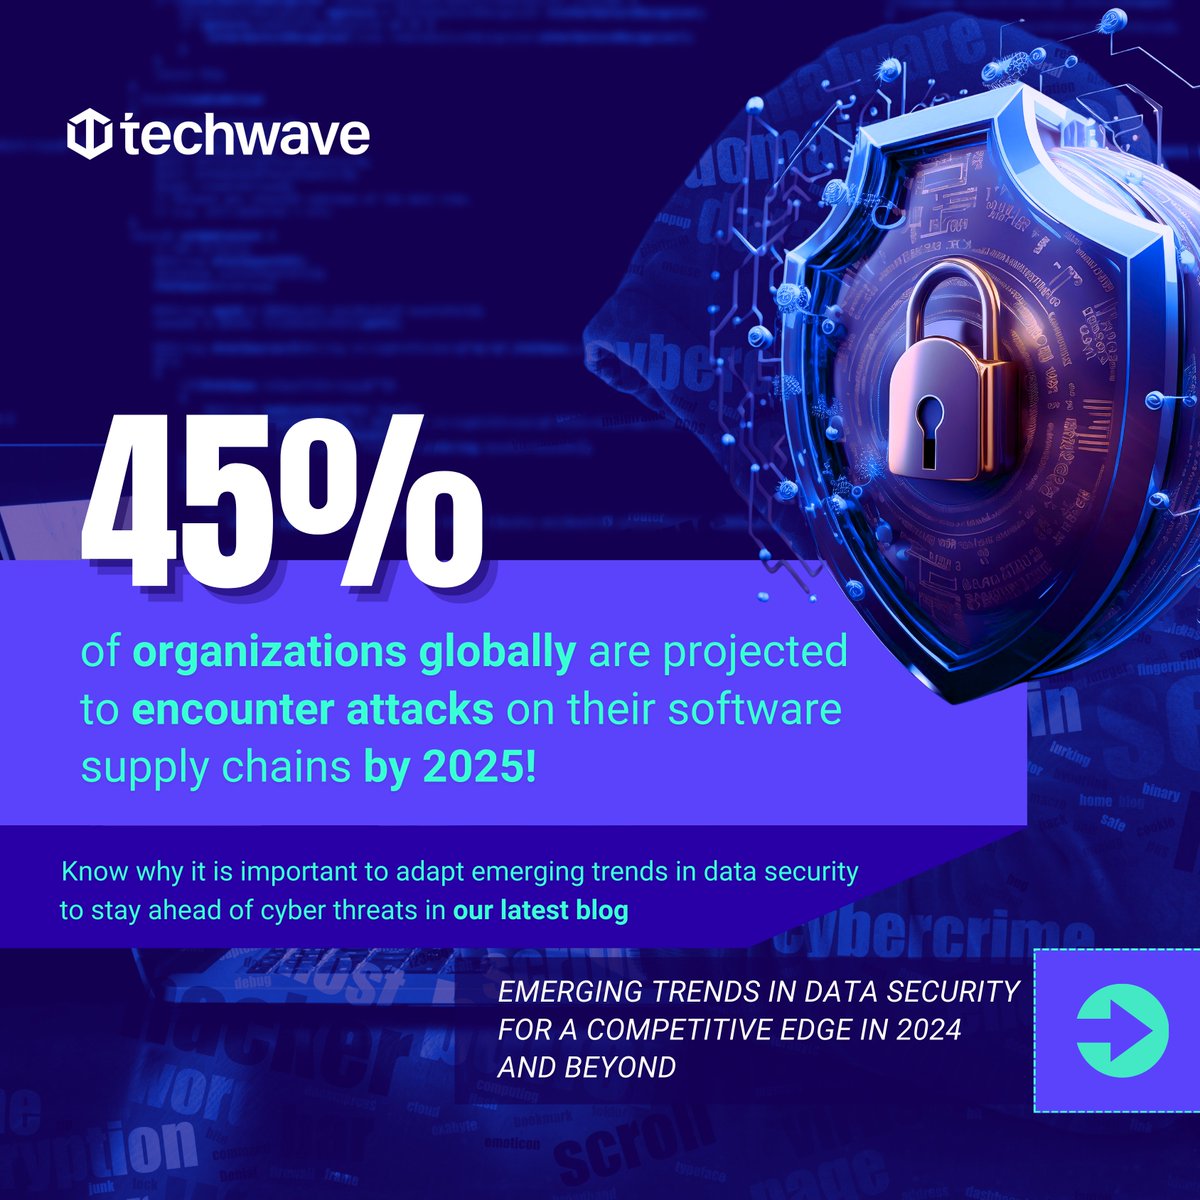 Ready to safeguard your data? Delve into our latest blog, unveiling the top 5 data security trends for 2024 and beyond. Read more here: techwave.net/emerging-trend… #Datatrends #techwave #security #datasecurity #datasecuritysolutions #innovation #techsolutions #empower